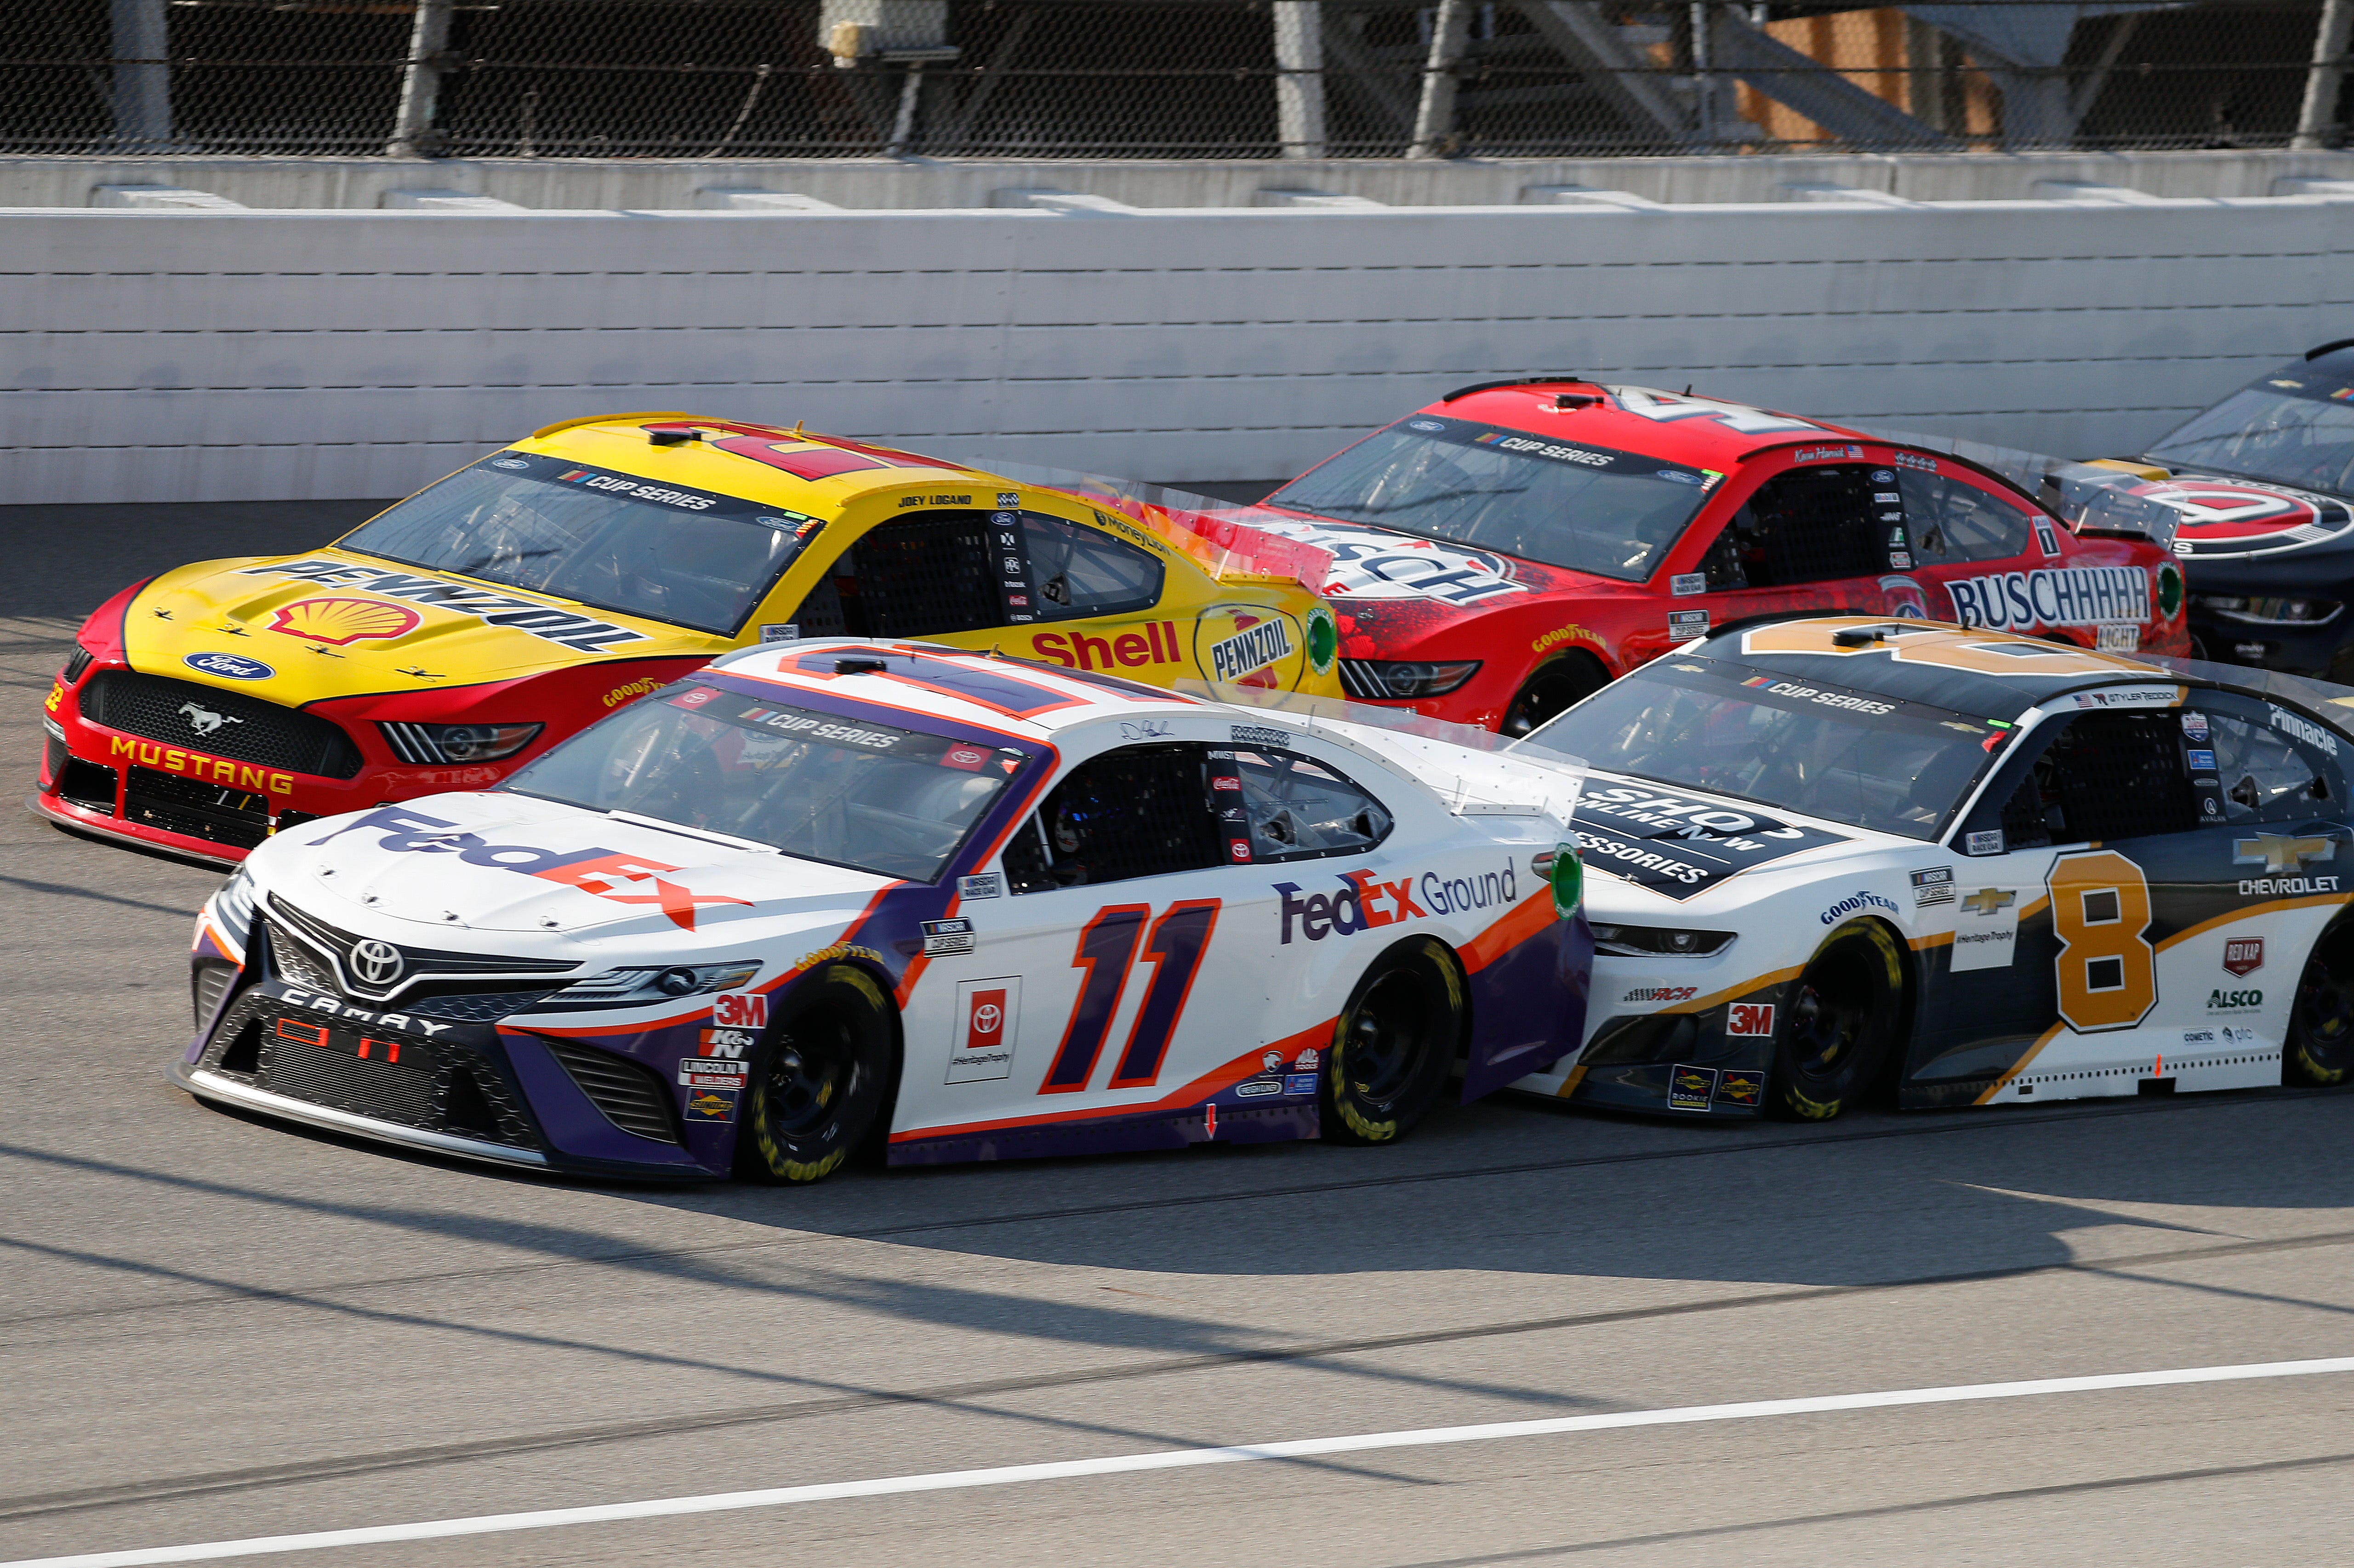 Denny Hamlin (11), Joey Logano (22), Kevin Harvick (4) and Tyler Reddick (8) compete during a NASCAR Cup Series auto race at Michigan International Speedway.